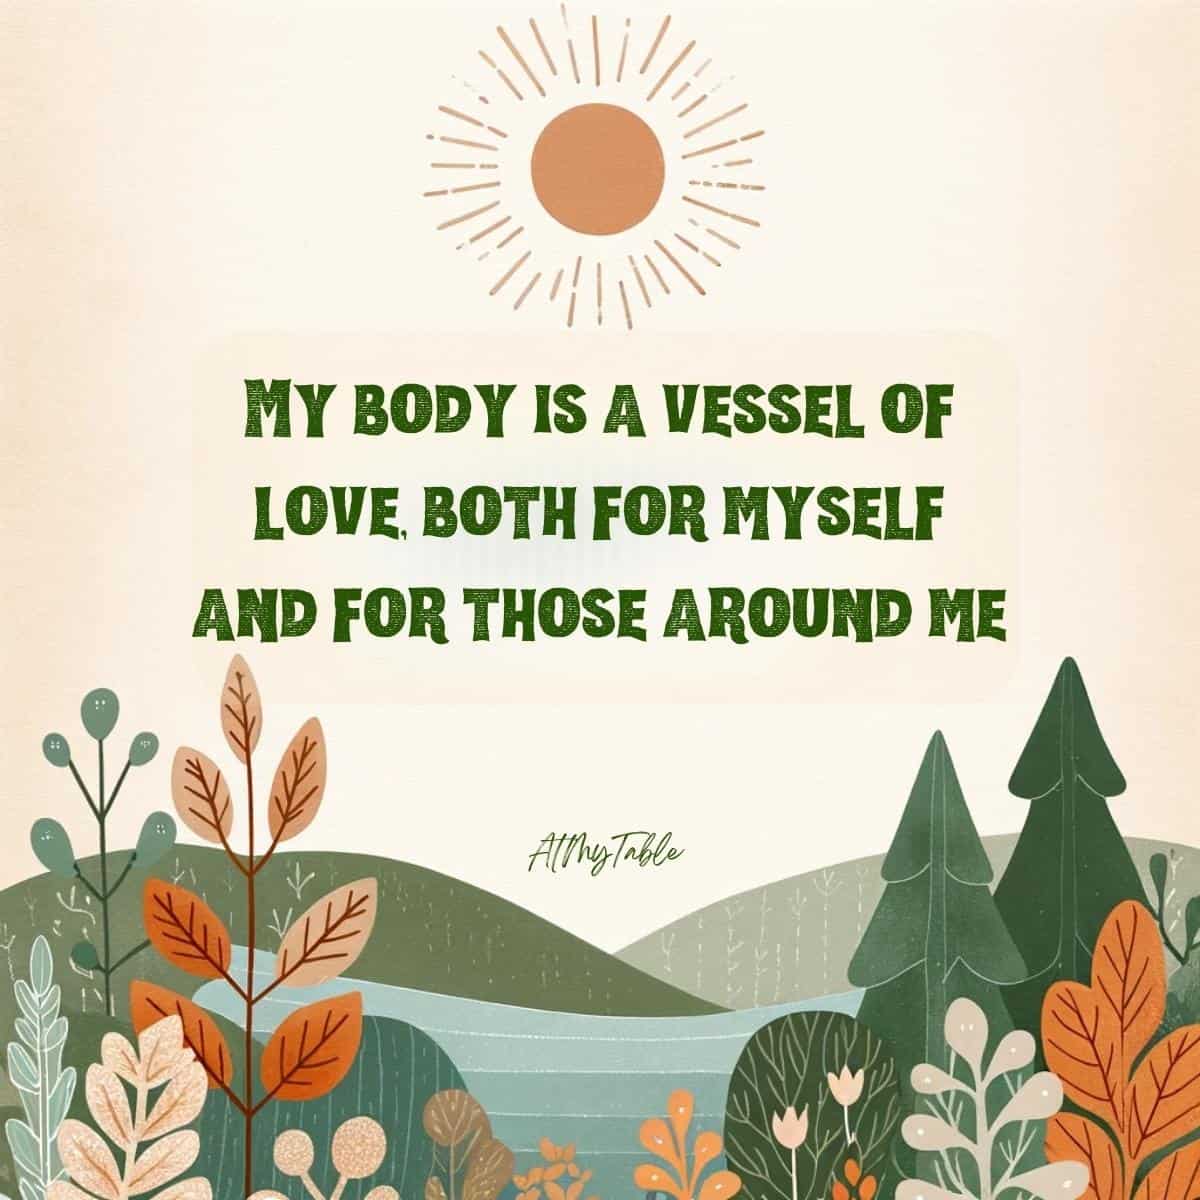 Positive affirmation card with cartoon images of leaves and mountains in pale natureal colors. Text overlay reads My body is a vessel of love, both for myself and for those around me.